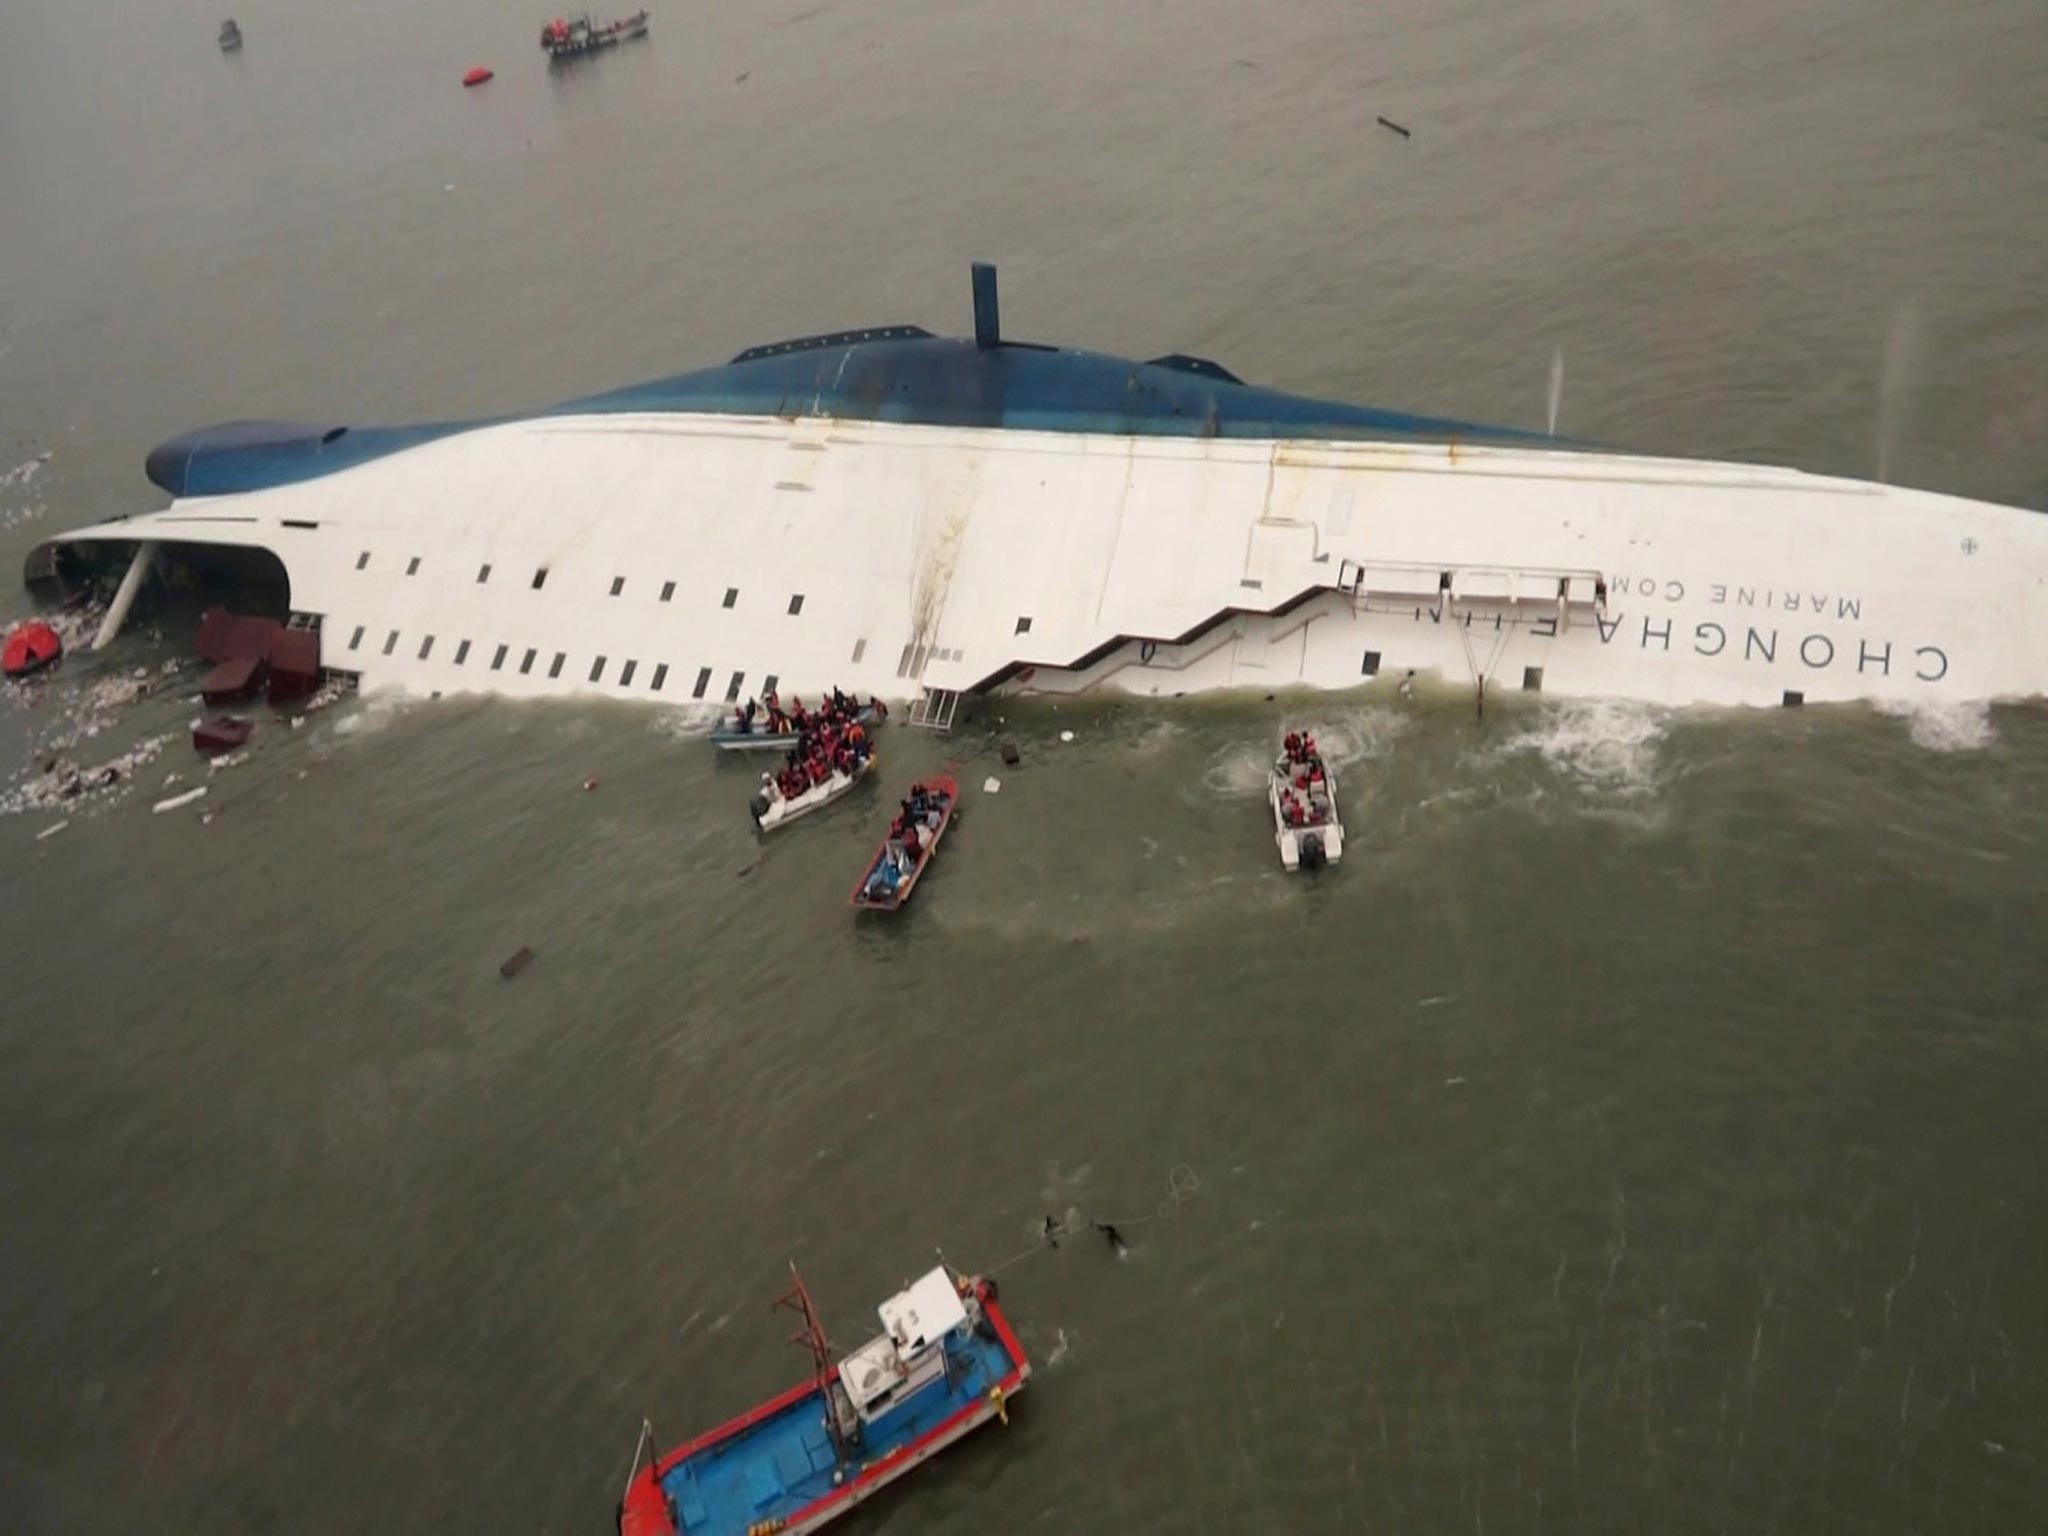 South Korean rescue team boats and fishing boats rescuing passengers off the sinking Sewol ferry in April this year